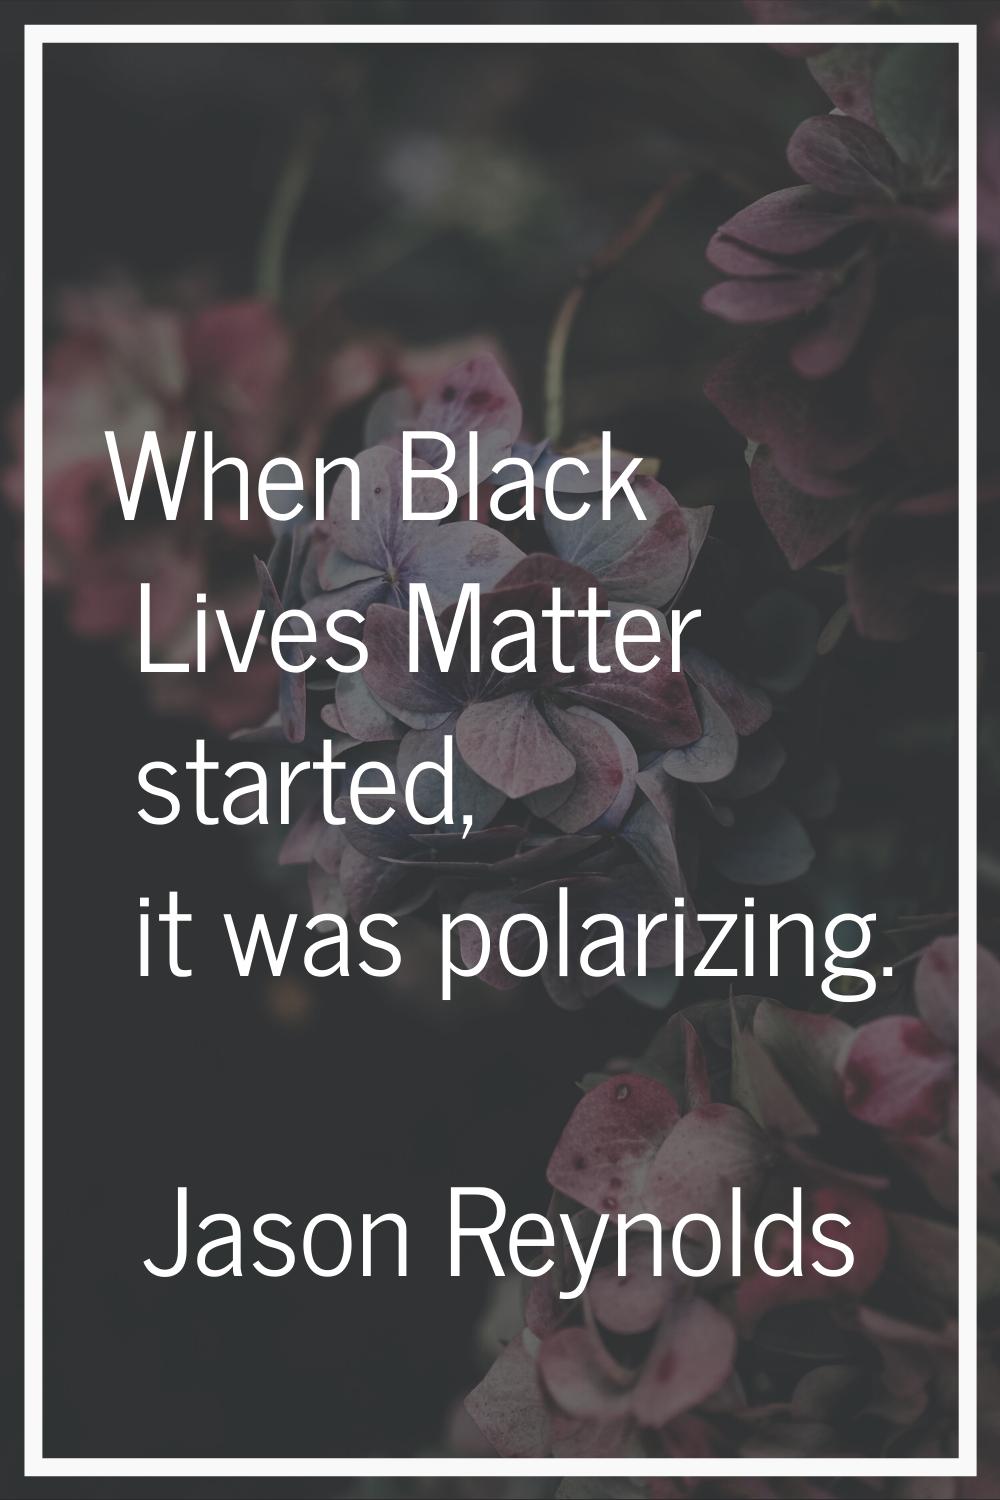 When Black Lives Matter started, it was polarizing.